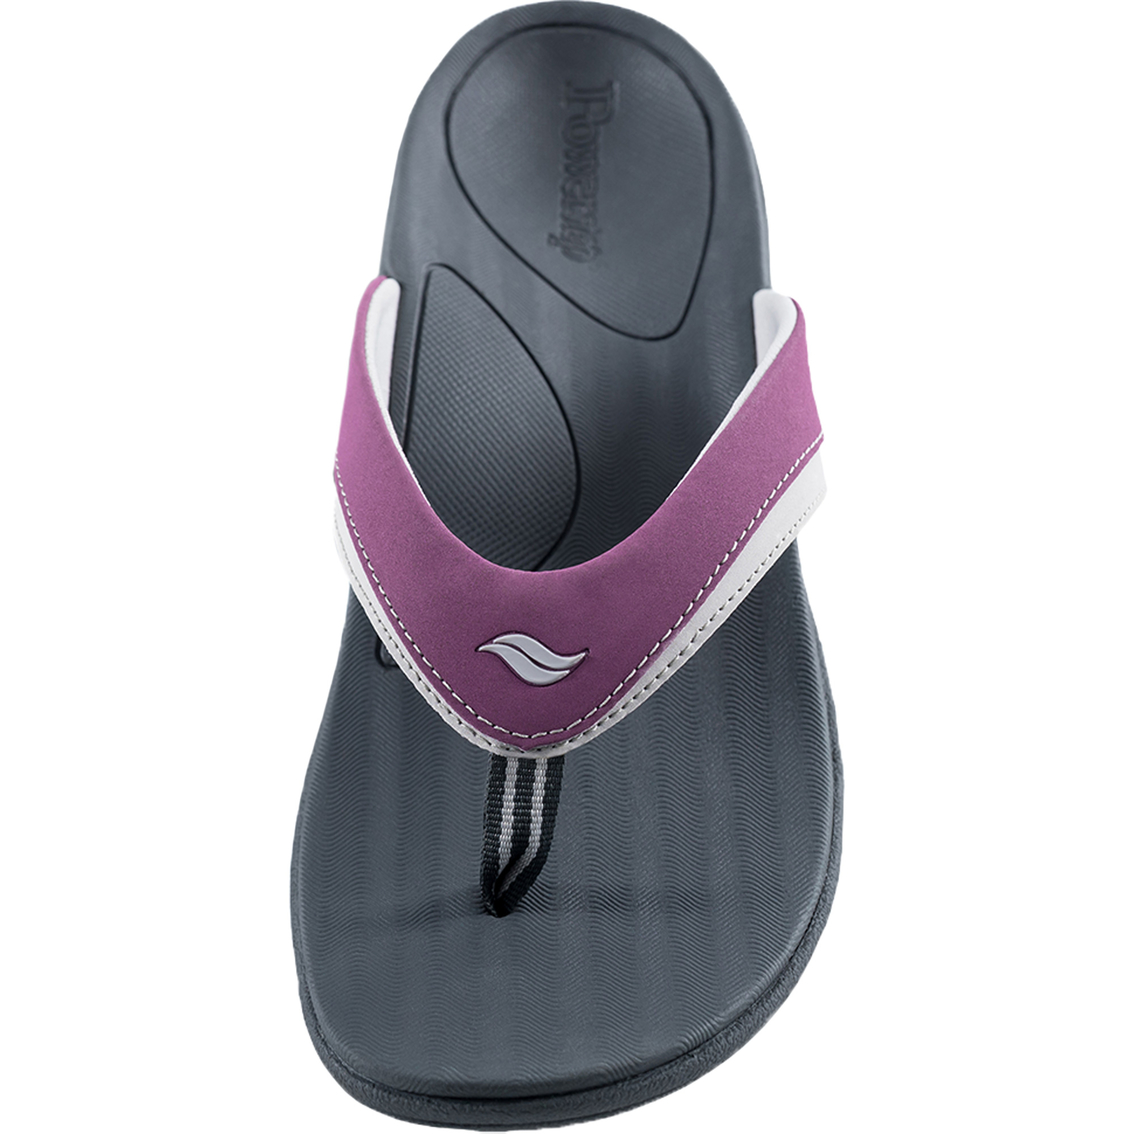 Powerstep Women's Fusion Sandals - Image 3 of 5